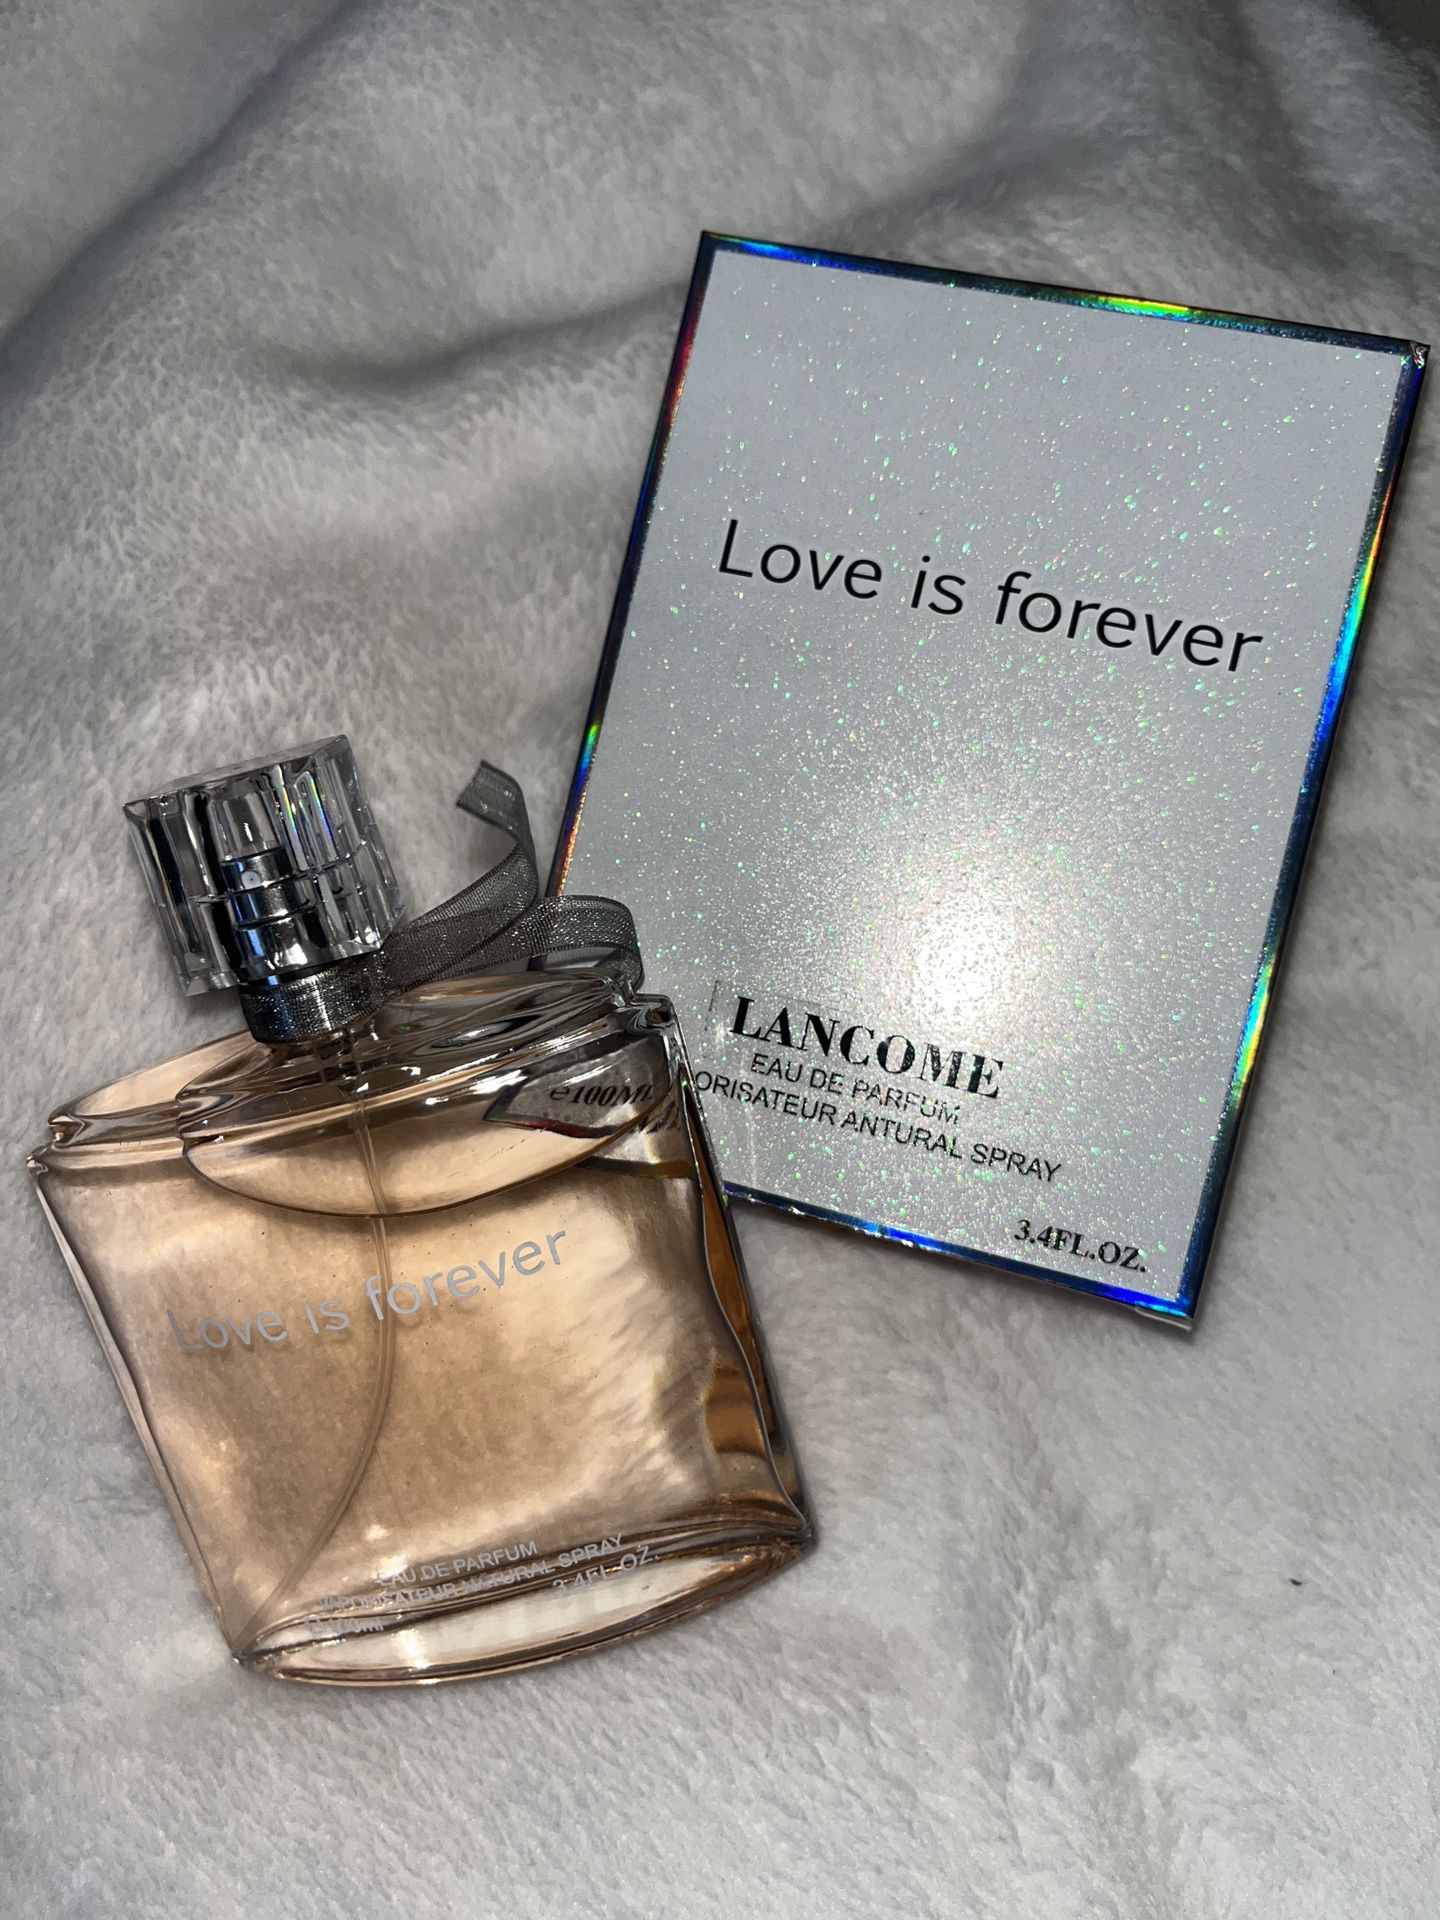 Love Is Forever Lancome perfume